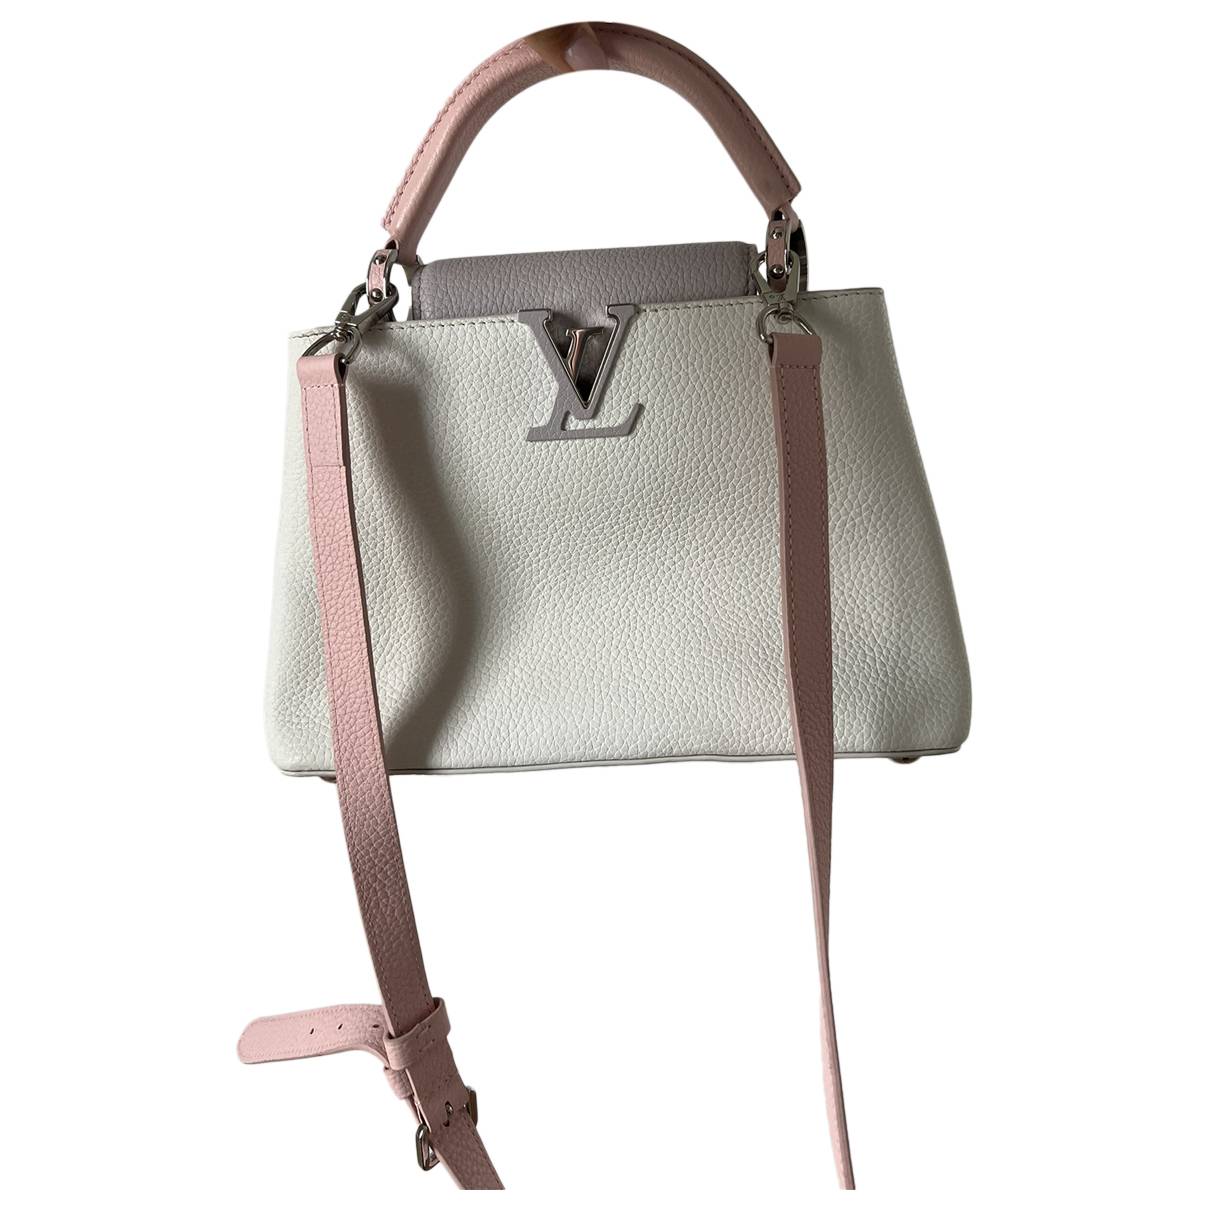 Capucines leather handbag Louis Vuitton White in Leather - 33537023